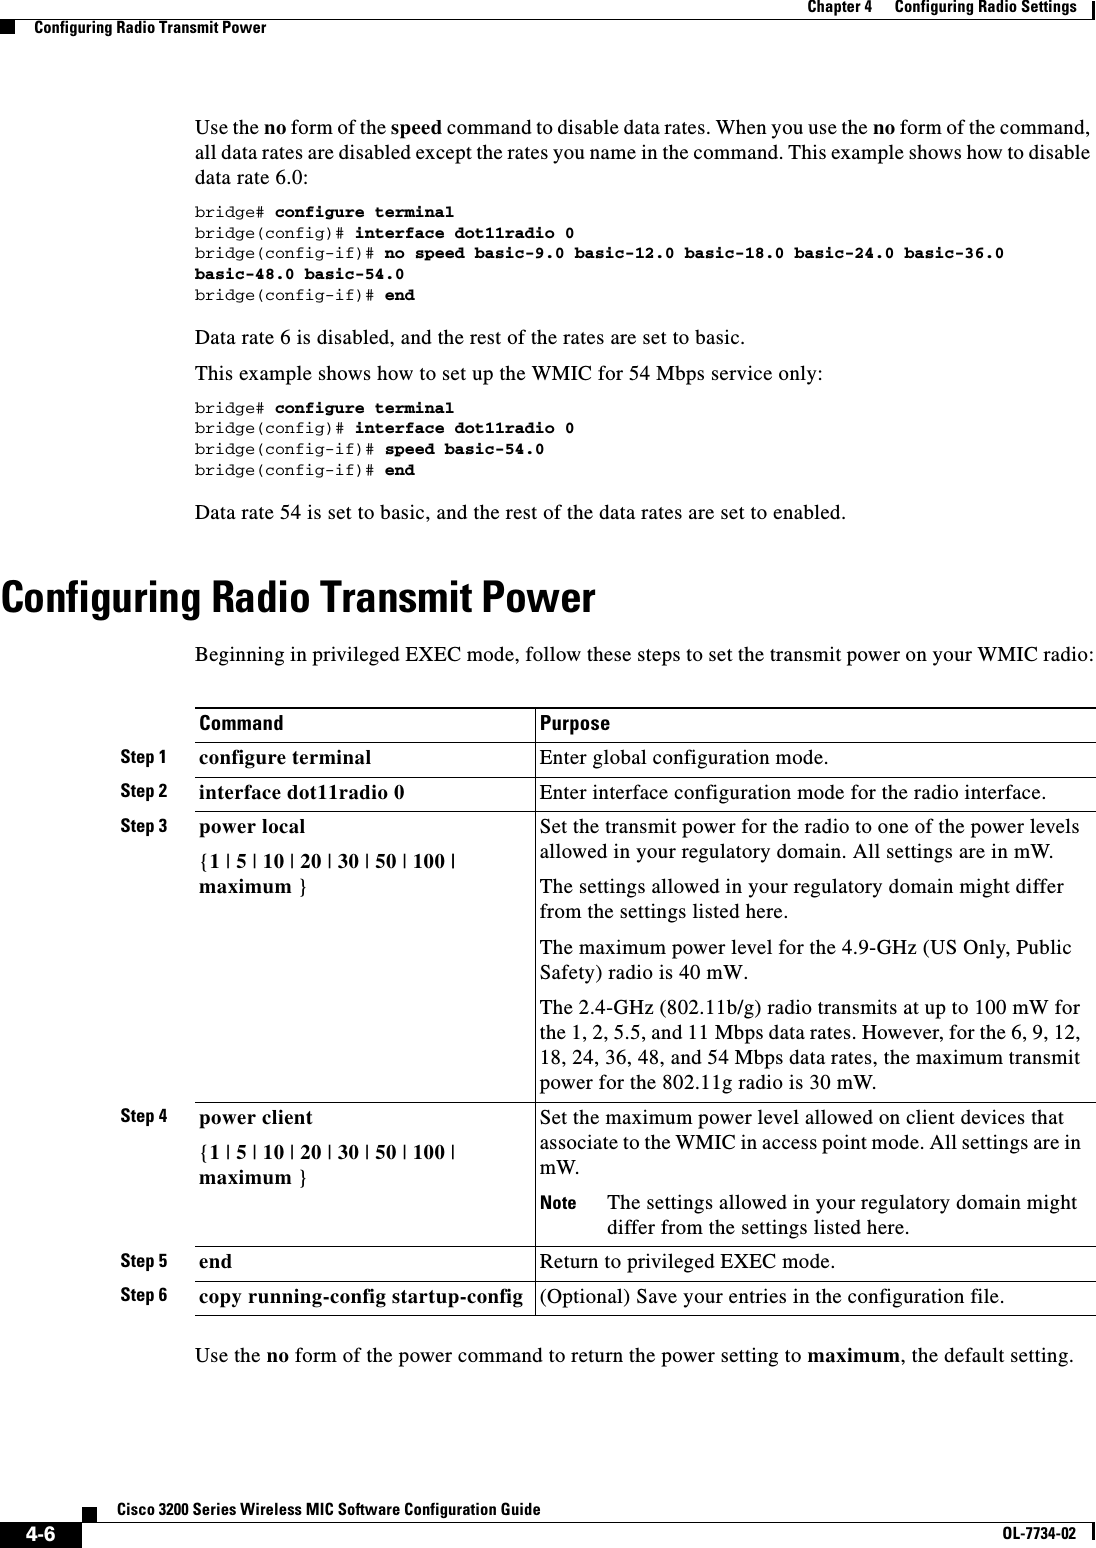 4-6Cisco 3200 Series Wireless MIC Software Configuration GuideOL-7734-02Chapter 4      Configuring Radio SettingsConfiguring Radio Transmit PowerUse the no form of the speed command to disable data rates. When you use the no form of the command, all data rates are disabled except the rates you name in the command. This example shows how to disable data rate 6.0:bridge# configure terminalbridge(config)# interface dot11radio 0bridge(config-if)# no speed basic-9.0 basic-12.0 basic-18.0 basic-24.0 basic-36.0 basic-48.0 basic-54.0bridge(config-if)# endData rate 6 is disabled, and the rest of the rates are set to basic.This example shows how to set up the WMIC for 54 Mbps service only:bridge# configure terminalbridge(config)# interface dot11radio 0bridge(config-if)# speed basic-54.0bridge(config-if)# endData rate 54 is set to basic, and the rest of the data rates are set to enabled.Configuring Radio Transmit PowerBeginning in privileged EXEC mode, follow these steps to set the transmit power on your WMIC radio:Use the no form of the power command to return the power setting to maximum, the default setting. Command PurposeStep 1 configure terminal Enter global configuration mode.Step 2 interface dot11radio 0 Enter interface configuration mode for the radio interface. Step 3 power local{1 | 5|10 |20 |30 |50 |100 |maximum }Set the transmit power for the radio to one of the power levels allowed in your regulatory domain. All settings are in mW.The settings allowed in your regulatory domain might differ from the settings listed here.The maximum power level for the 4.9-GHz (US Only, Public Safety) radio is 40 mW.The 2.4-GHz (802.11b/g) radio transmits at up to 100 mW for the 1, 2, 5.5, and 11 Mbps data rates. However, for the 6, 9, 12, 18, 24, 36, 48, and 54 Mbps data rates, the maximum transmit power for the 802.11g radio is 30 mW.Step 4 power client{1 | 5 | 10 | 20 | 30 | 50 | 100 | maximum }Set the maximum power level allowed on client devices that associate to the WMIC in access point mode. All settings are in mW.Note The settings allowed in your regulatory domain might differ from the settings listed here.Step 5 end Return to privileged EXEC mode.Step 6 copy running-config startup-config (Optional) Save your entries in the configuration file.